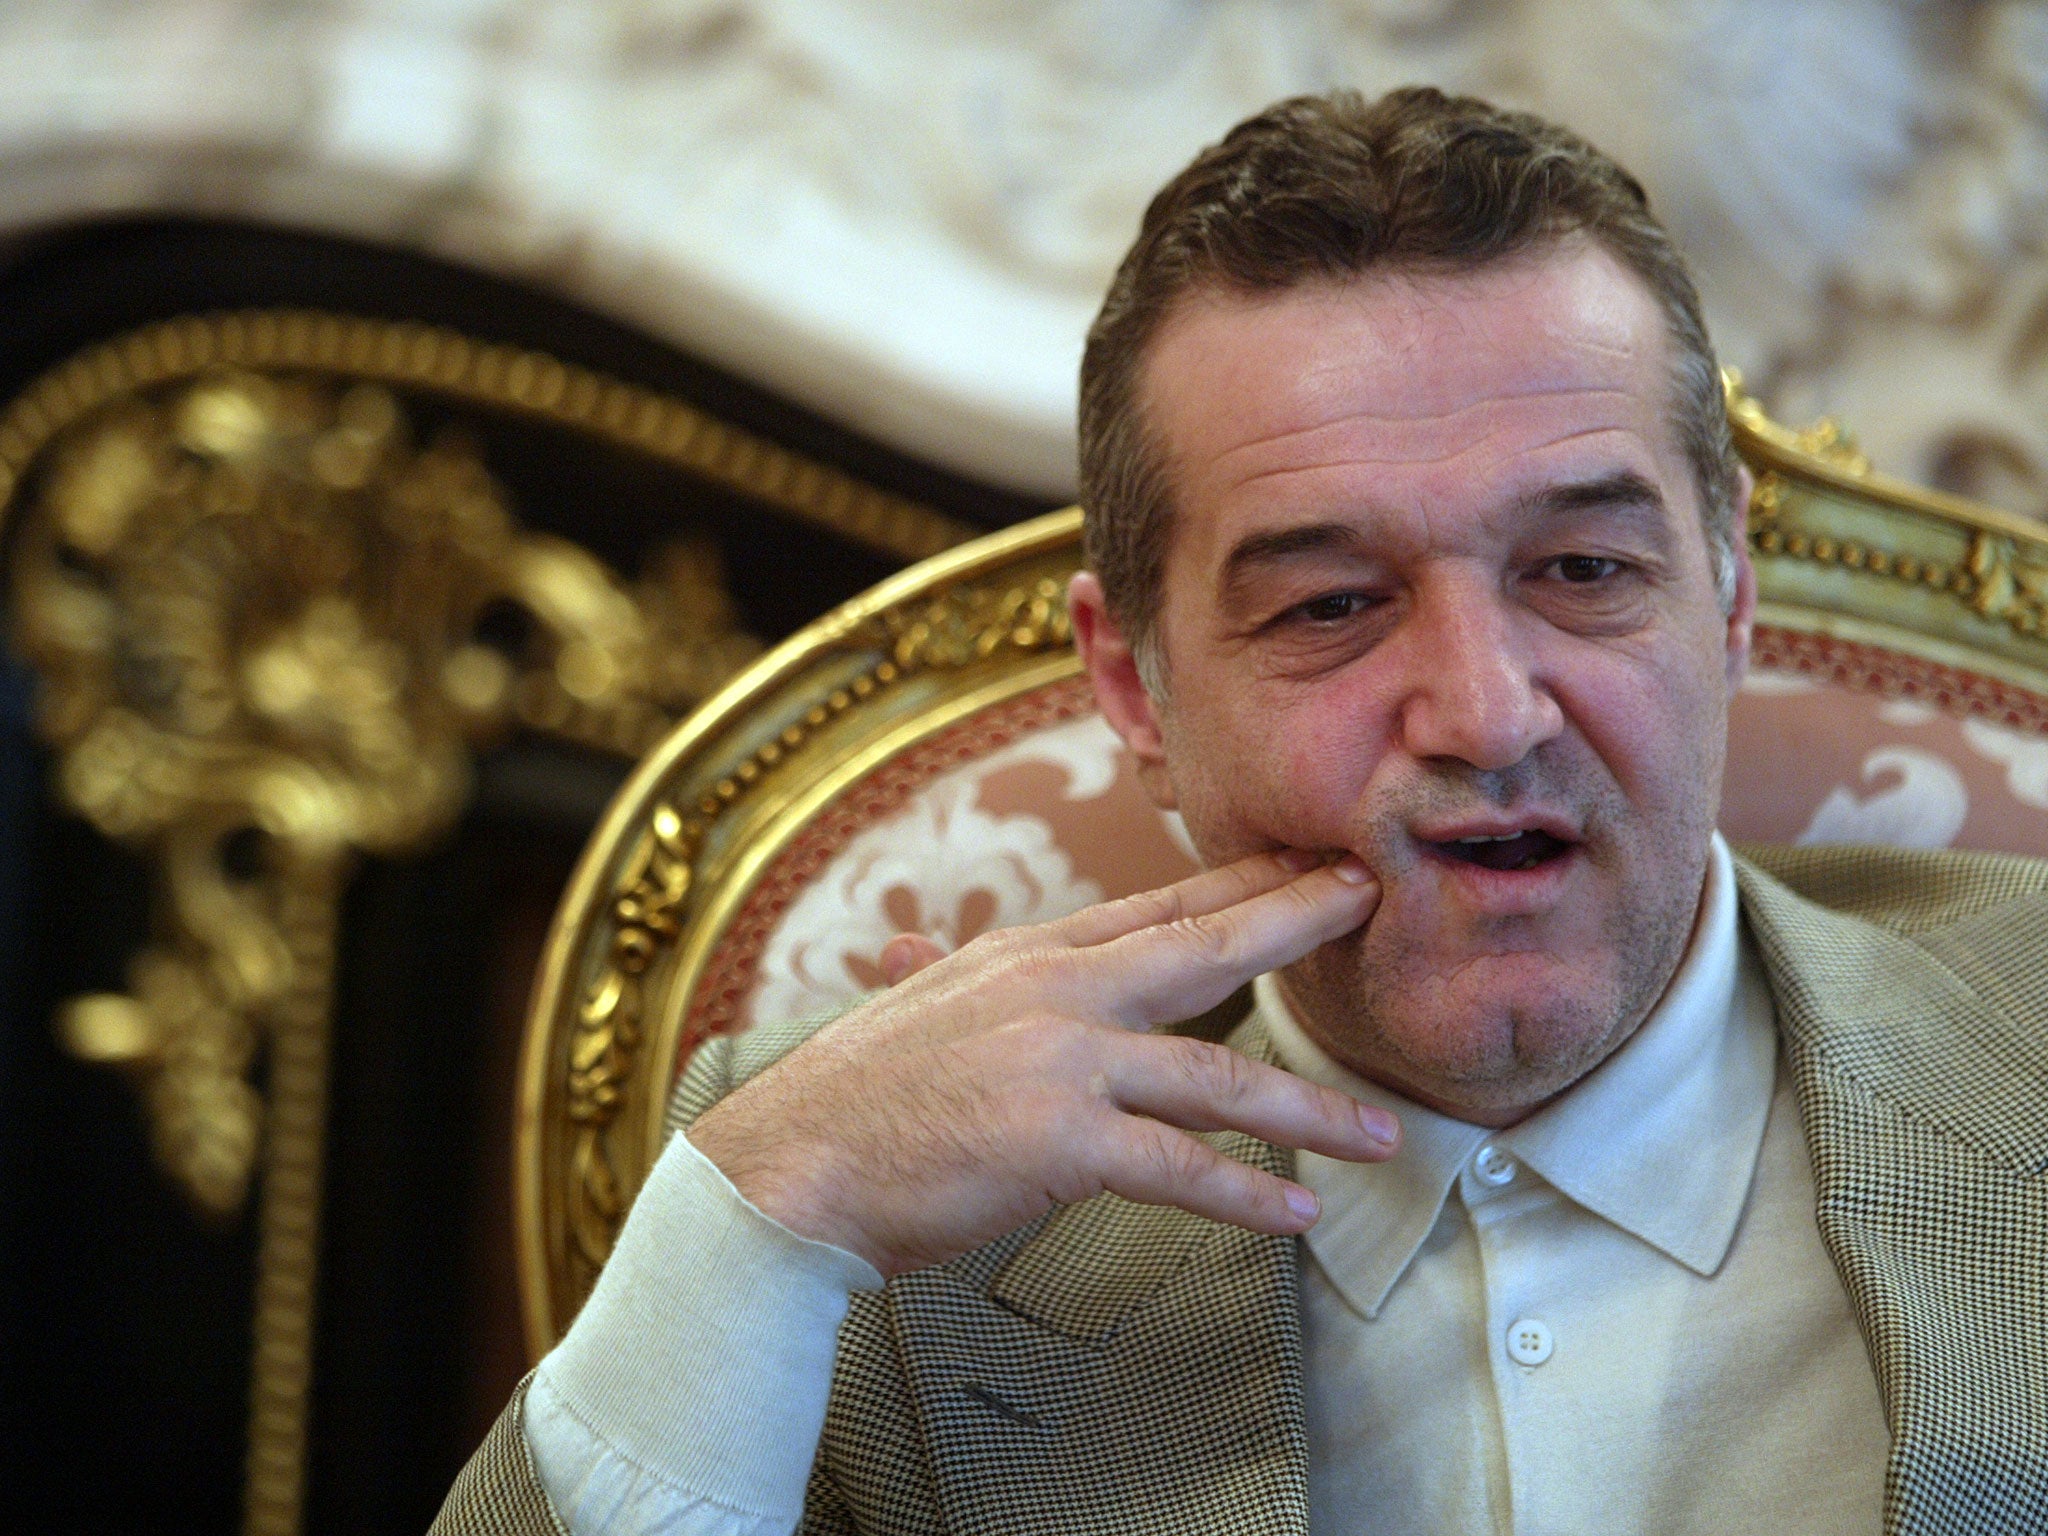 Becali has made previous deplorable comments about race, gender and sexuality